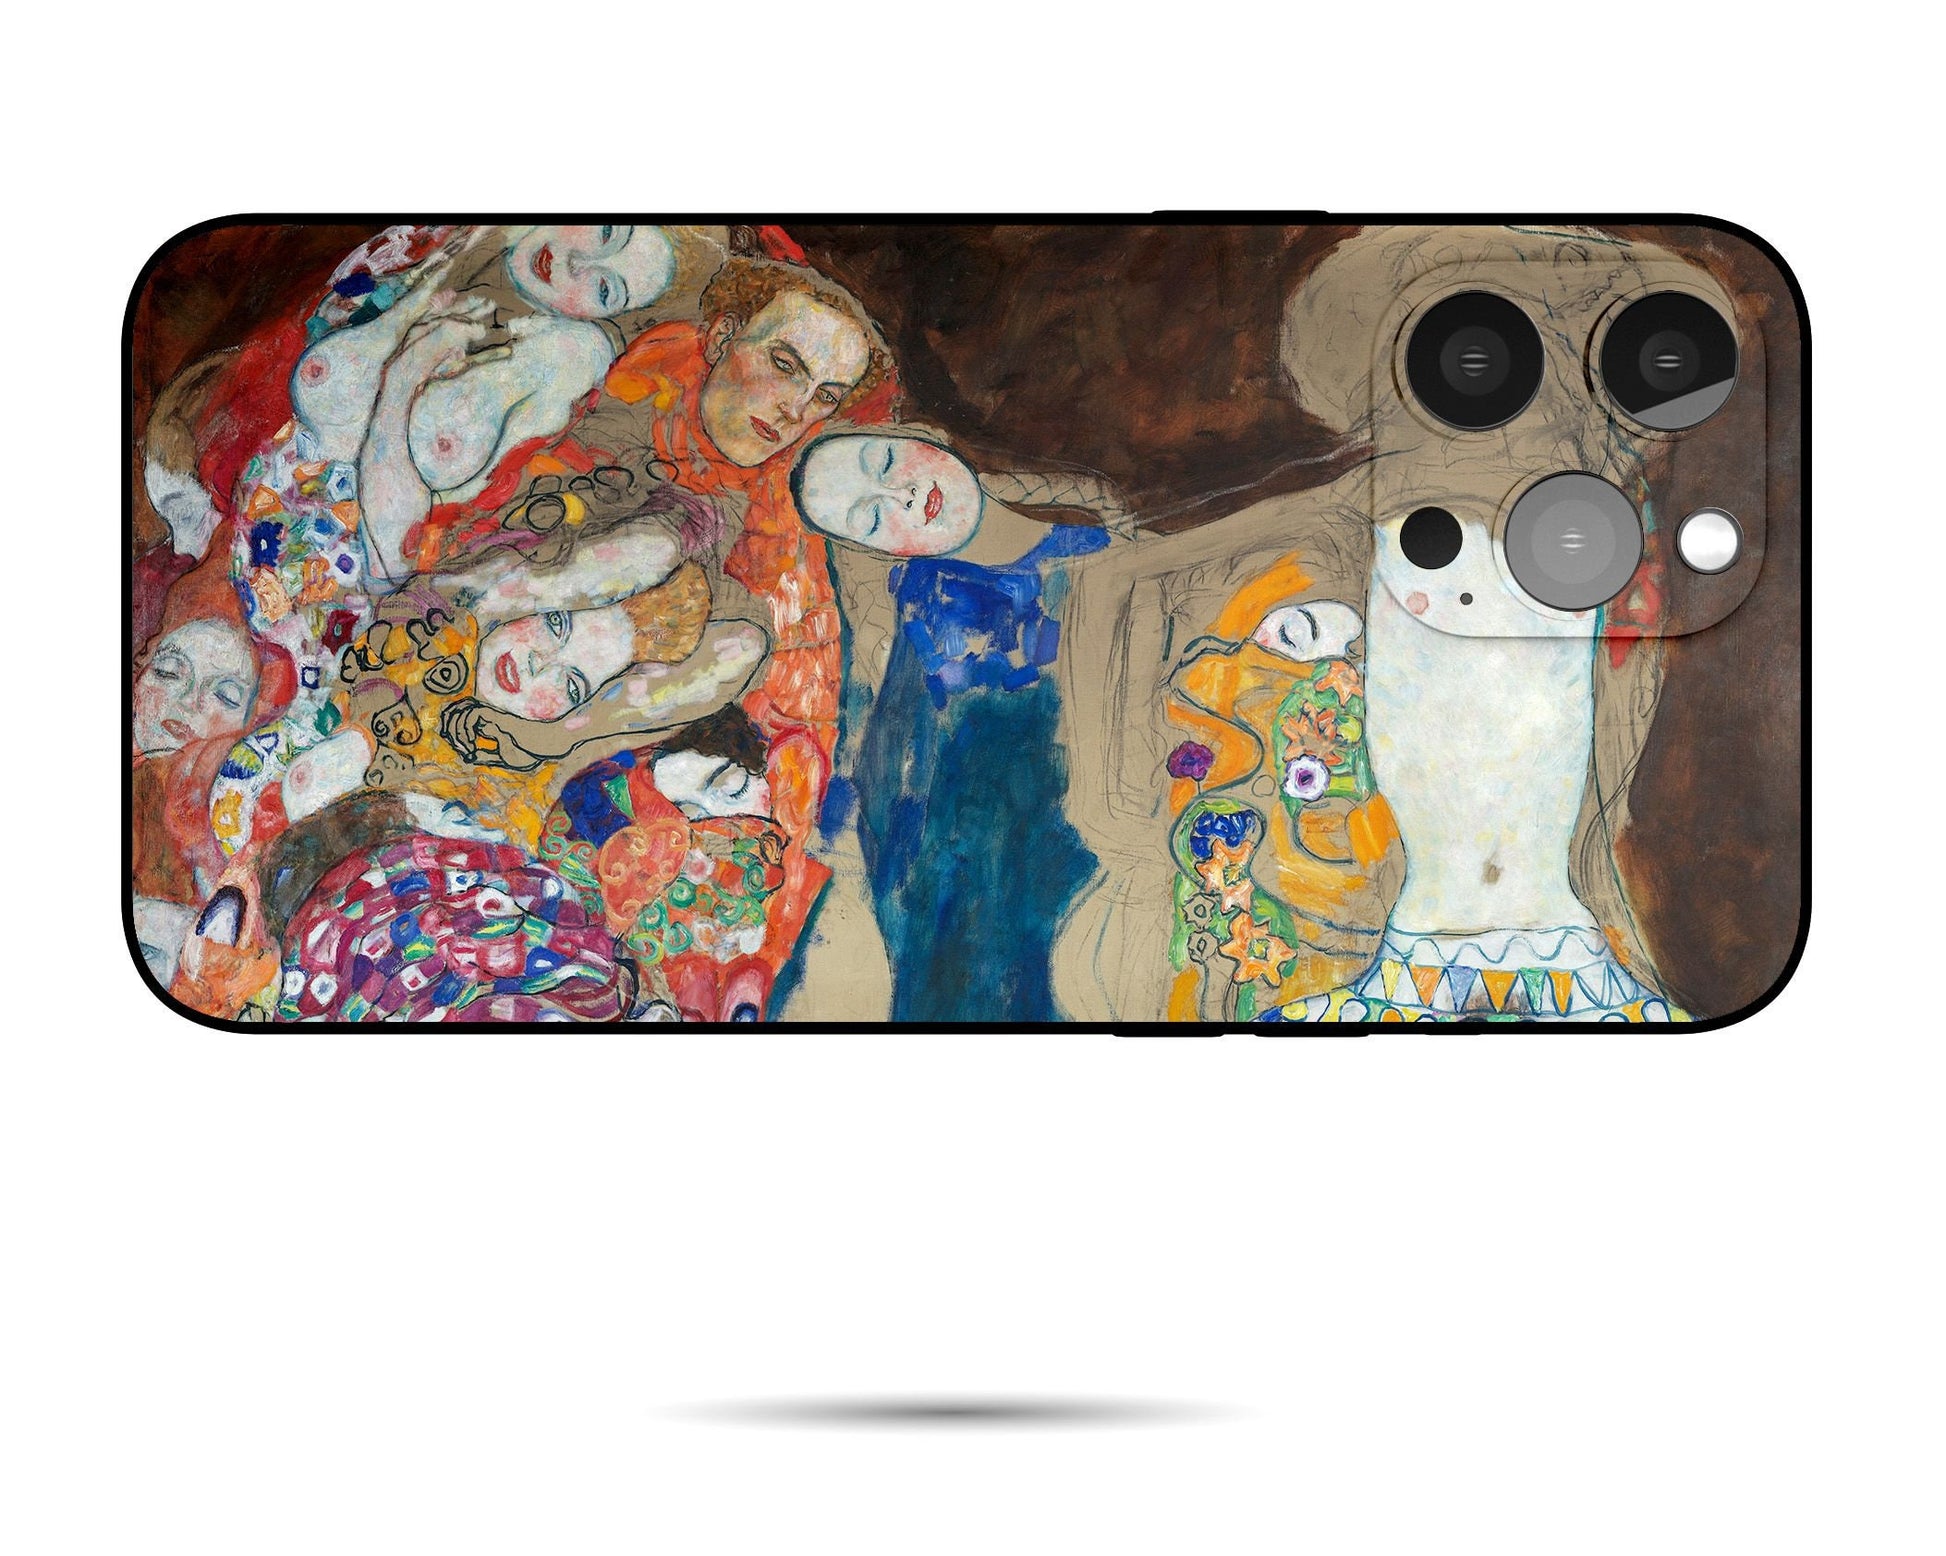 Iphone 14 Case Of Gustav Klimt Painting The Bride Iphone Cover, Iphone 12, Iphone X, Designer Iphone Case, Gift For Her, Iphone Case Matte